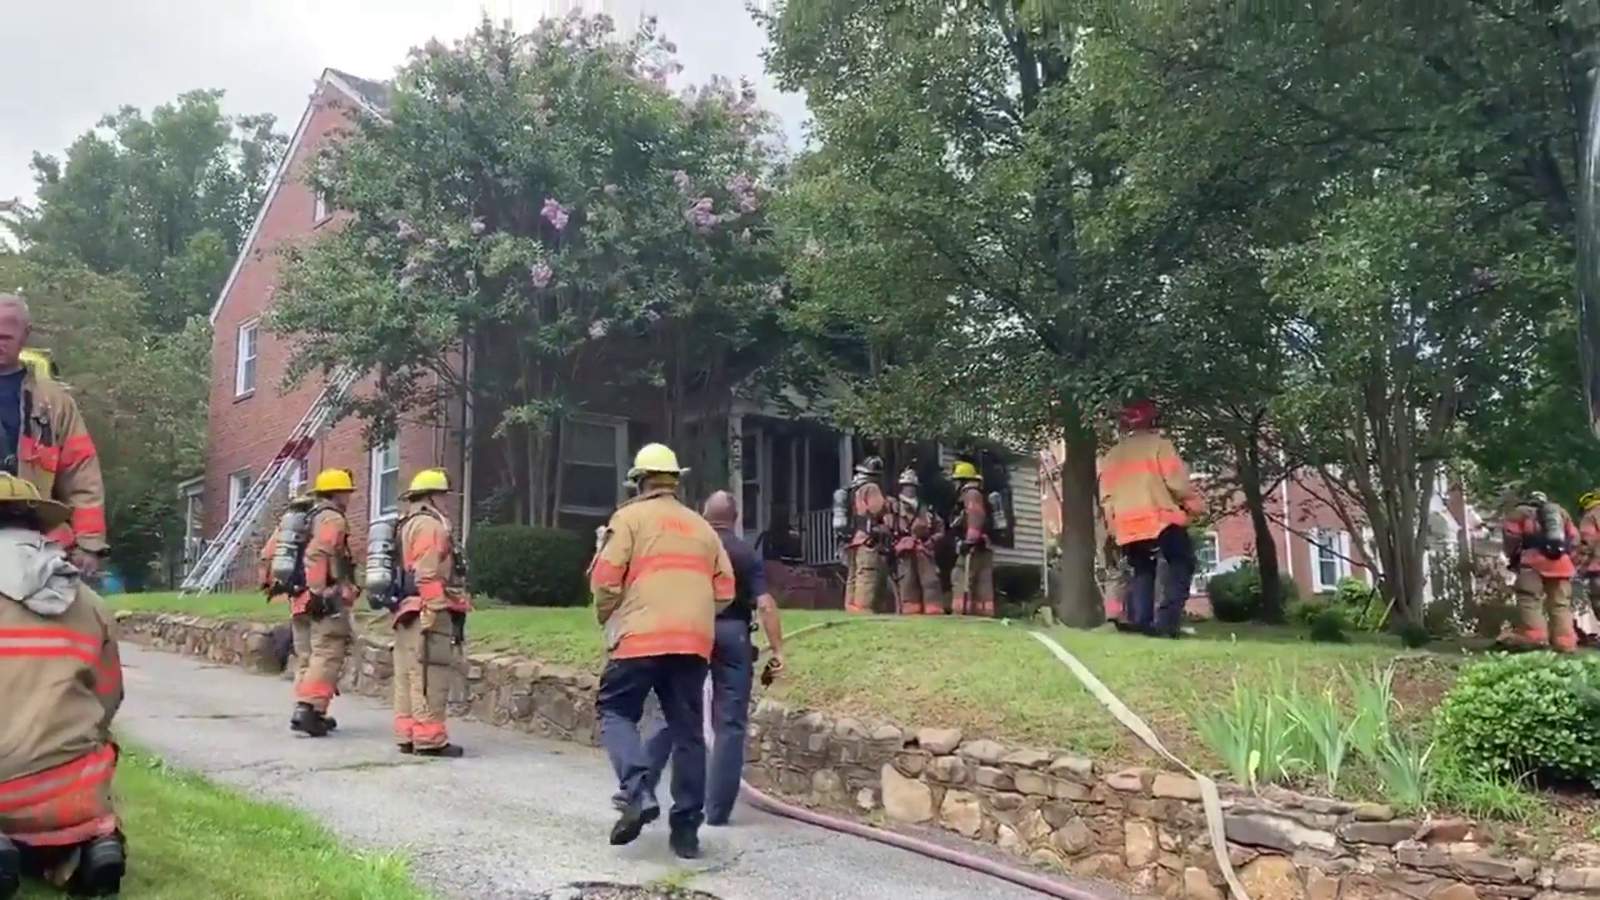 No one hurt in house fire near Valley View Mall